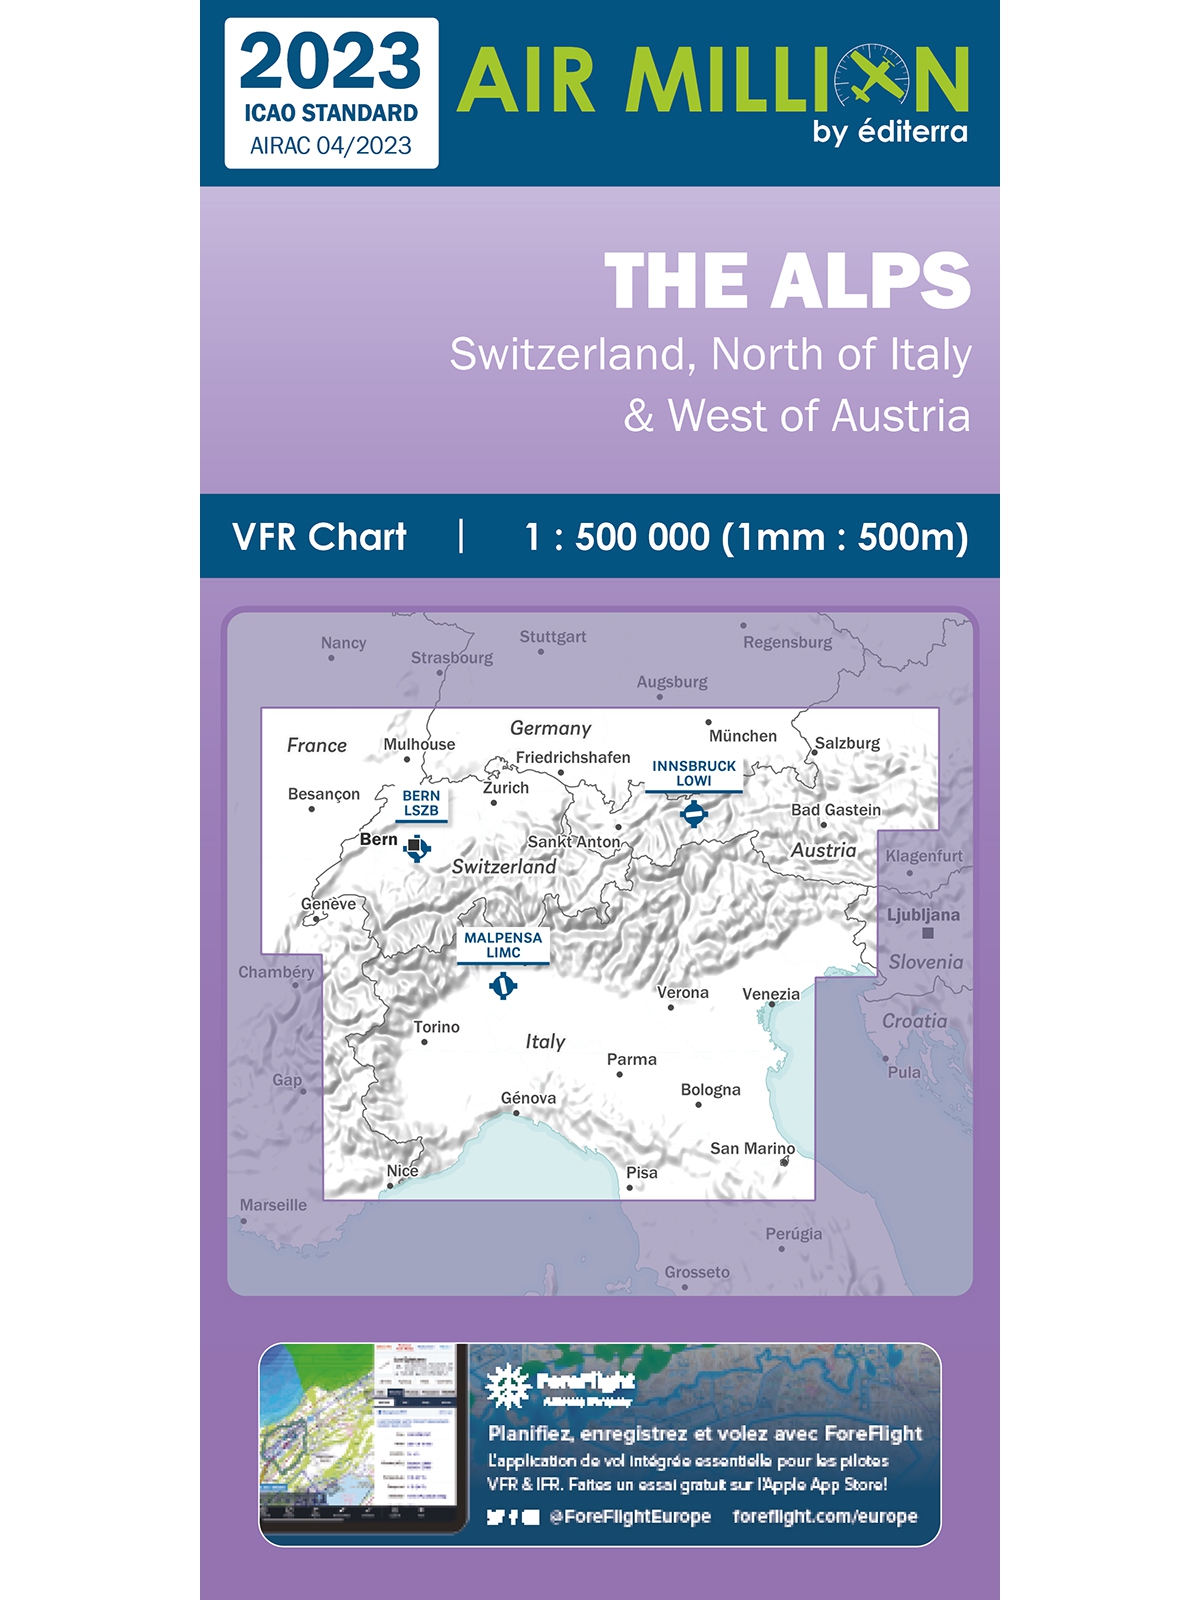 The Alps - Air Million Zoom VFR Chart 1:500.000, folded, 2023